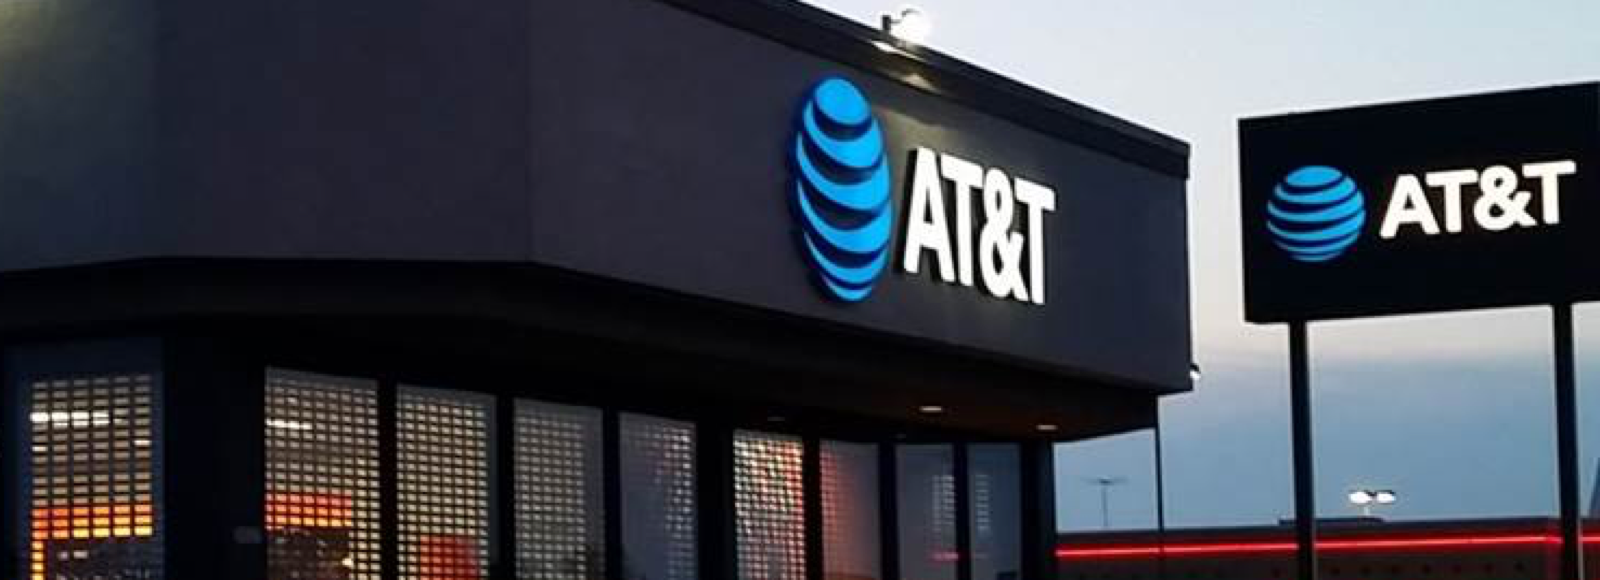 AT&T logo, illuminated sign, Custom sign, Channel letters